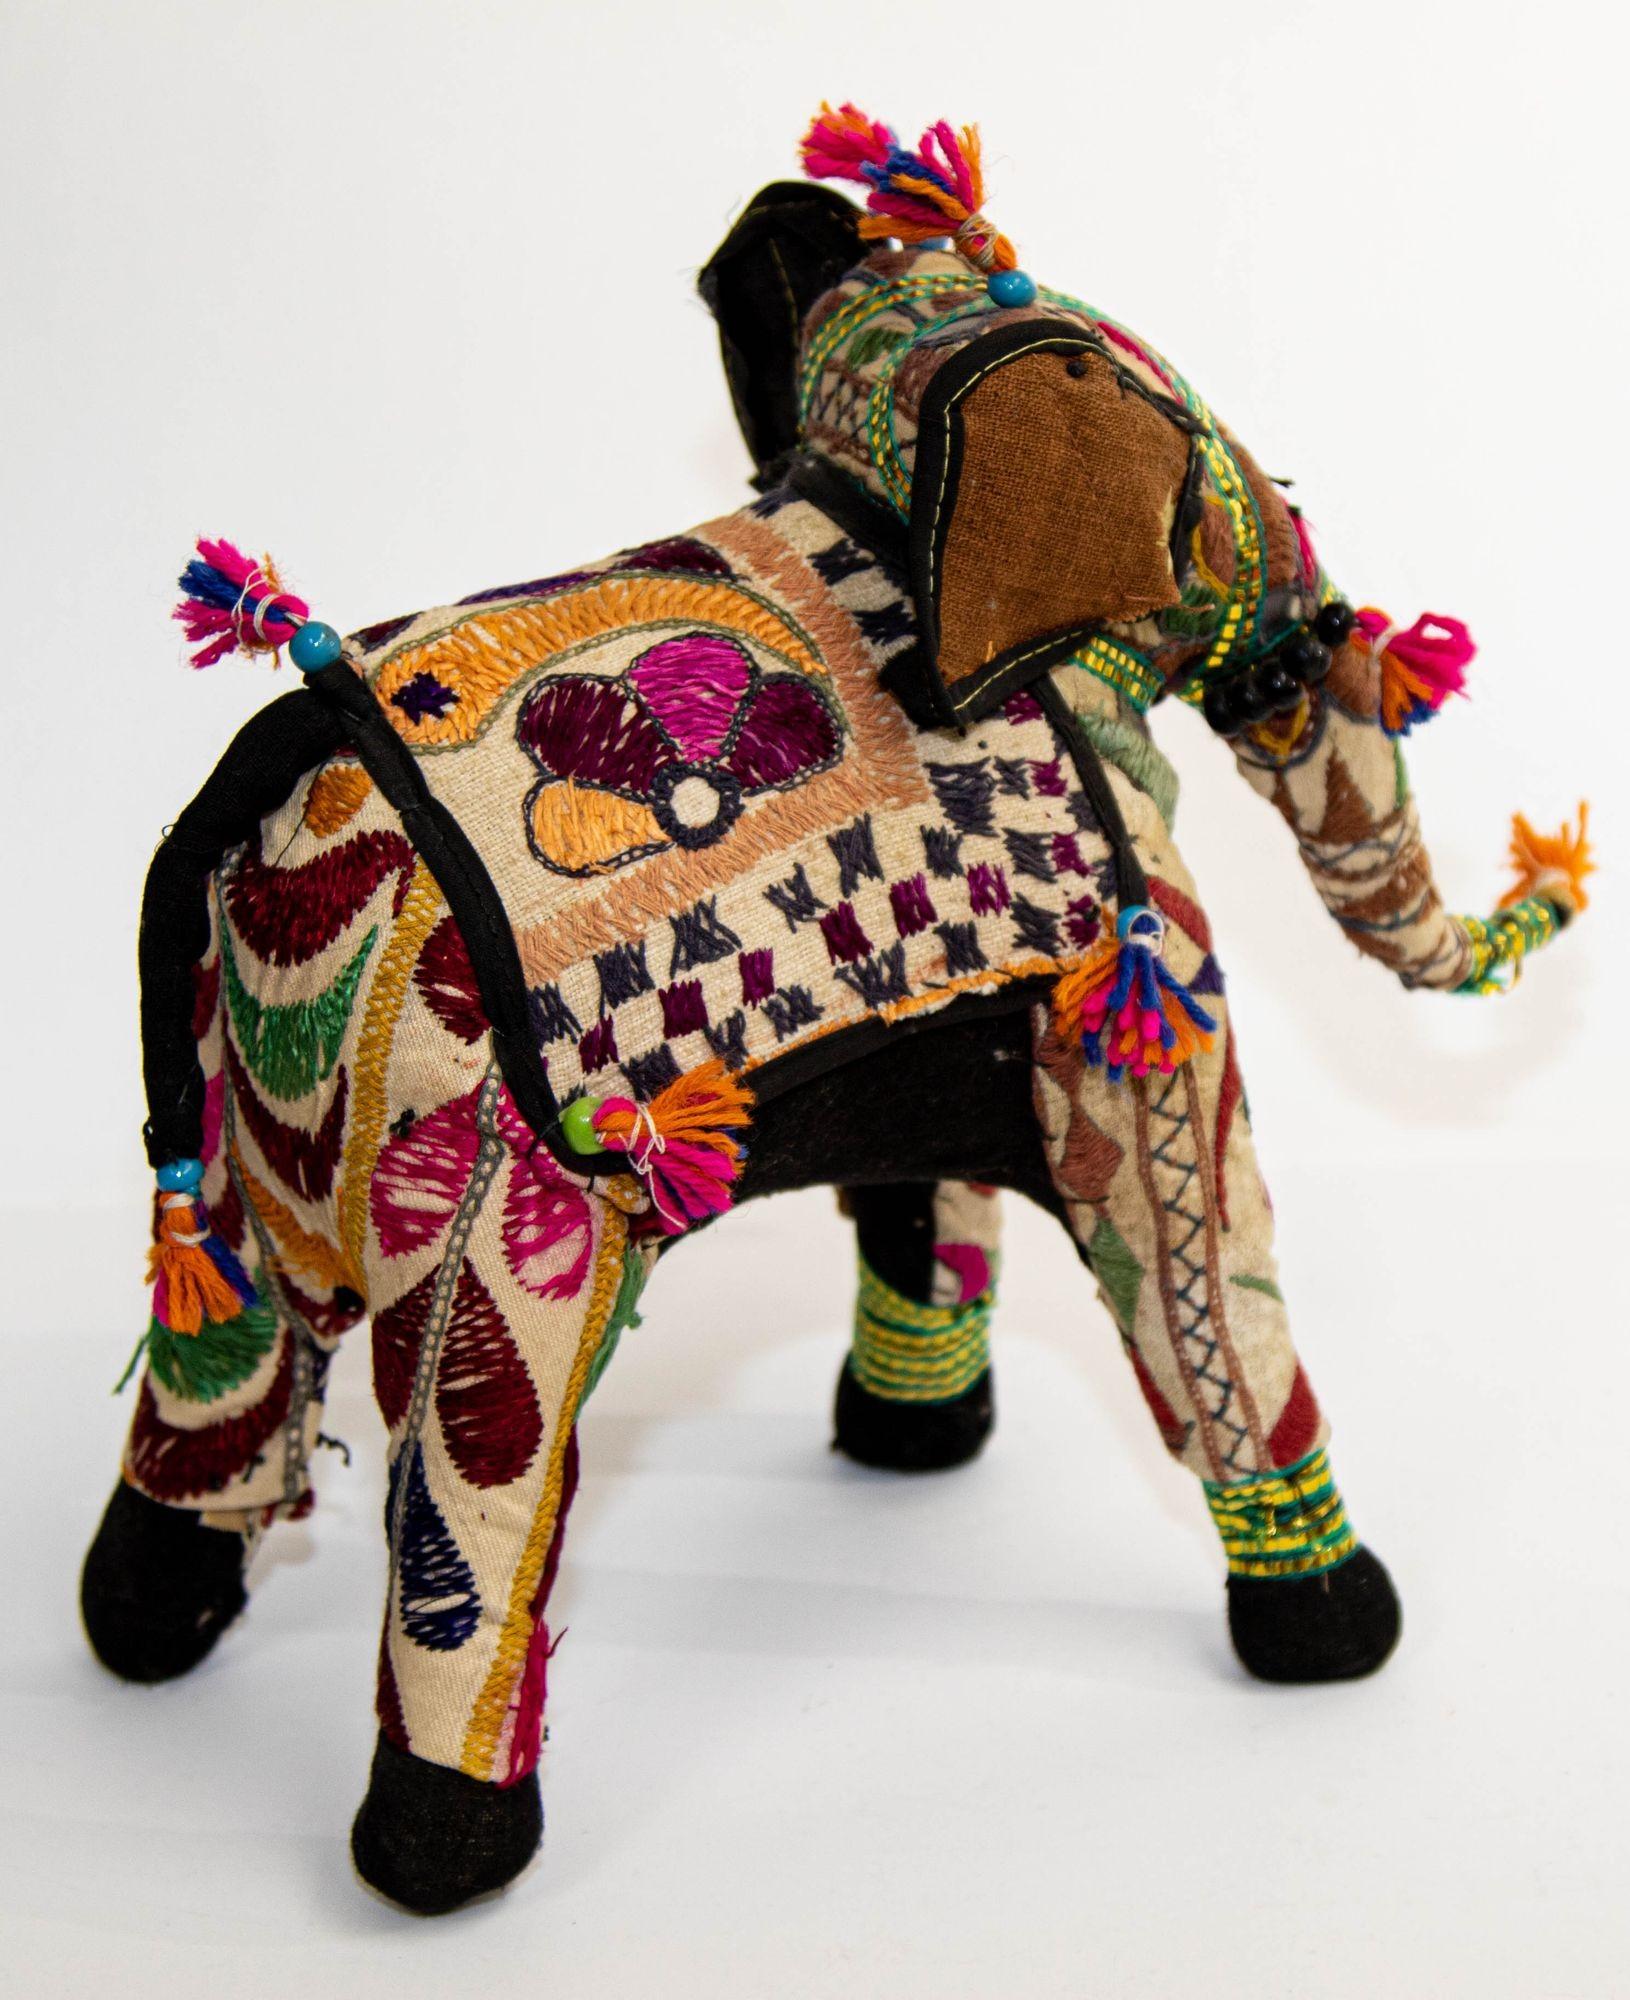 Vintage Raj Hand-Crafted Stuffed Cotton Embroidered Elephant, India, 1950 For Sale 1